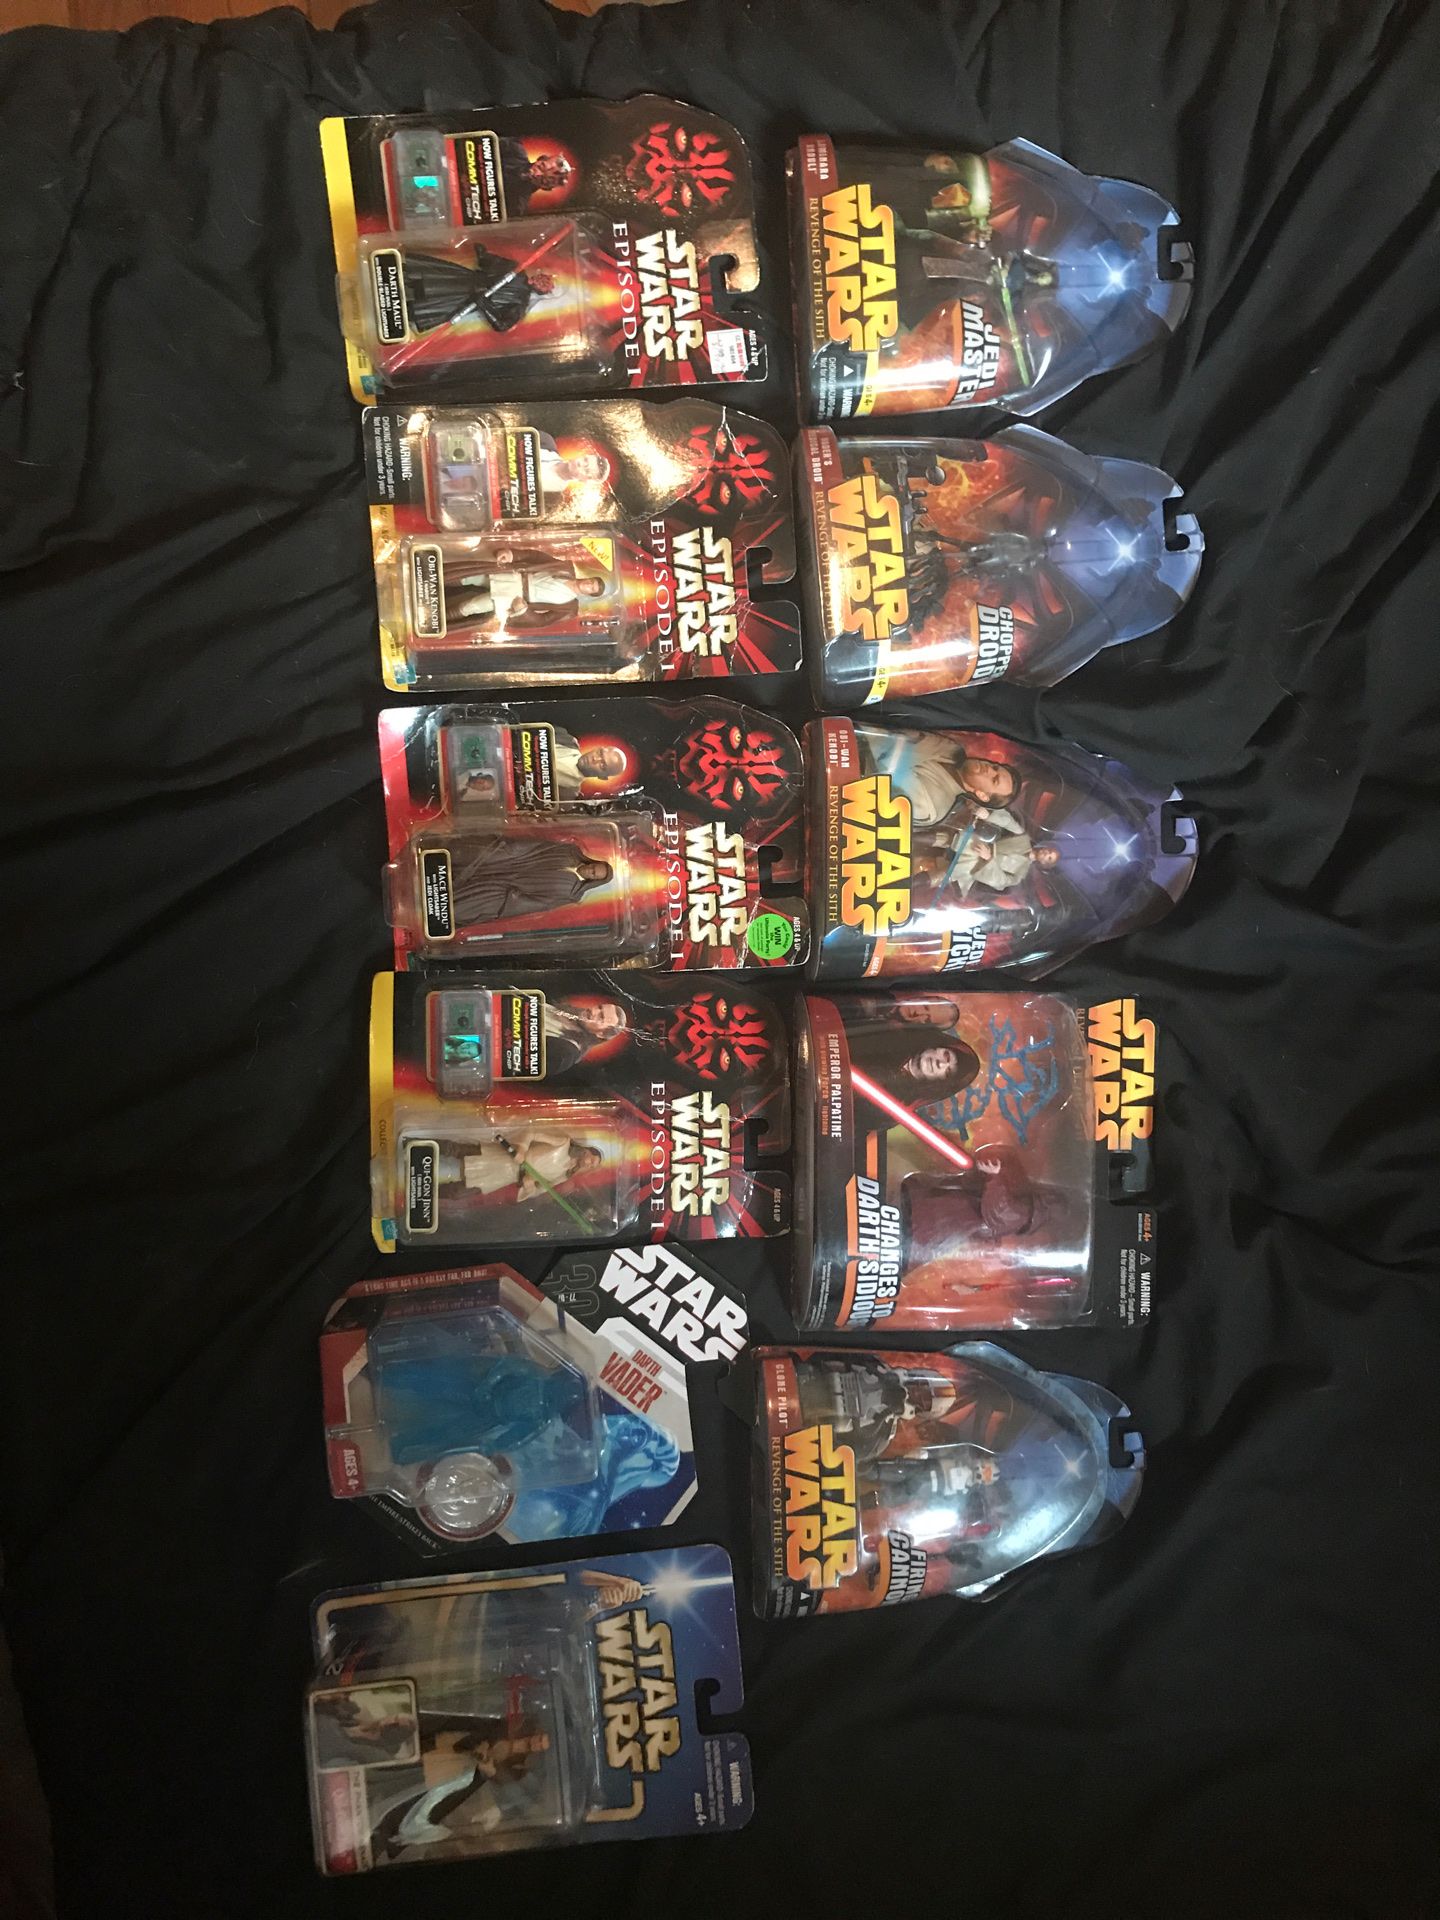 Star Wars collectable Toy allot